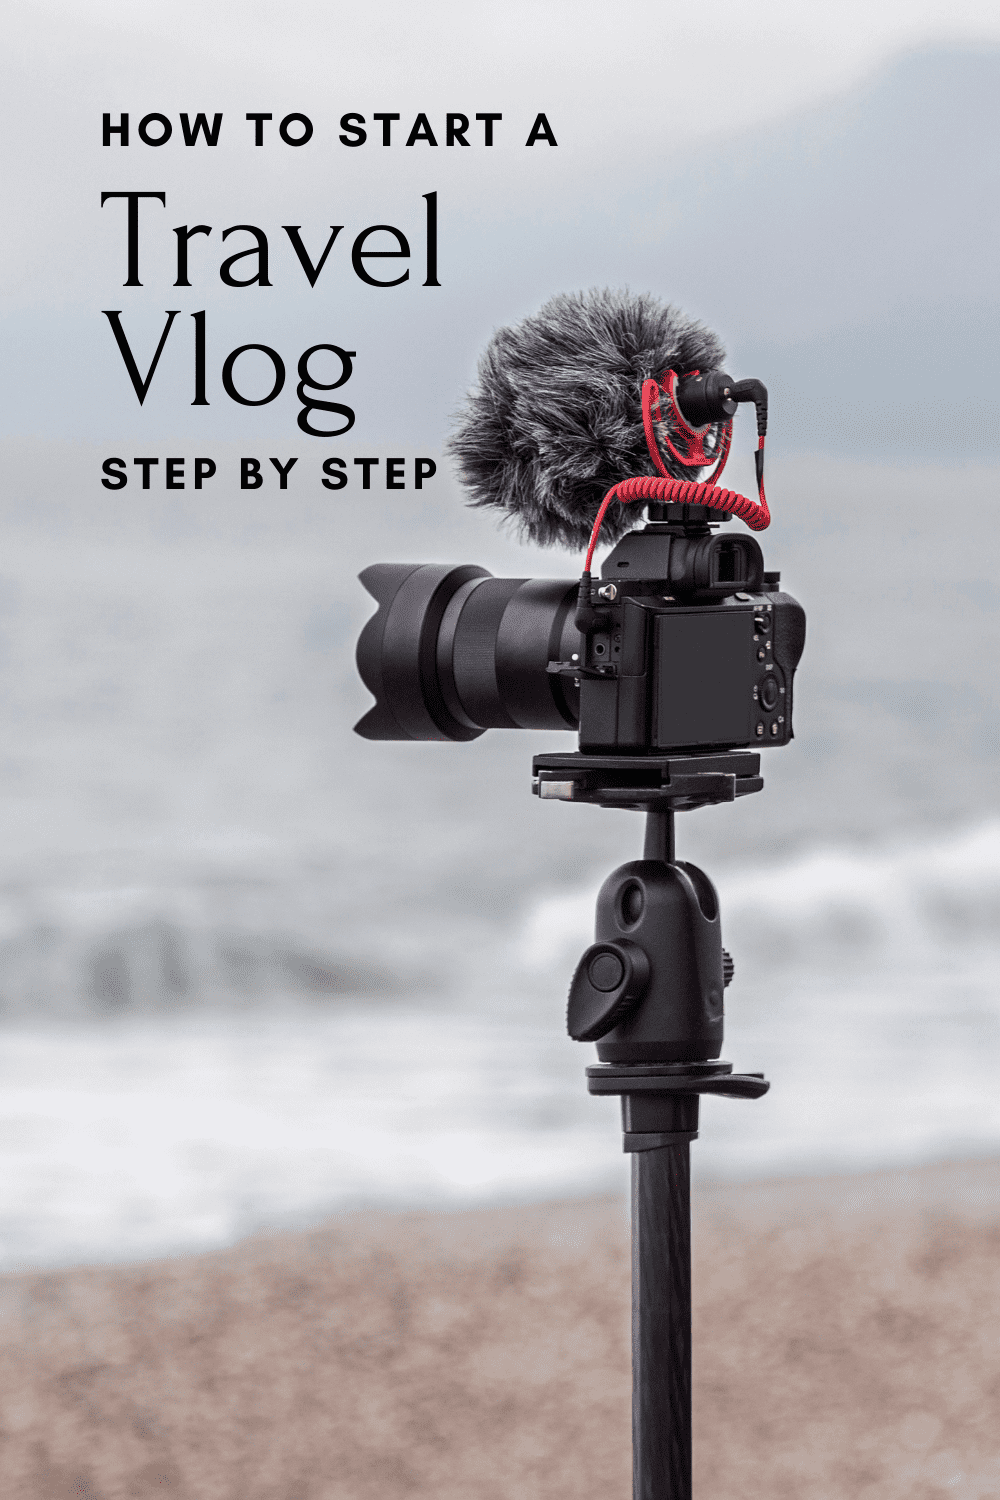 Camera with microphone attached. Text overlay says "how to start a travel vlog step by step"